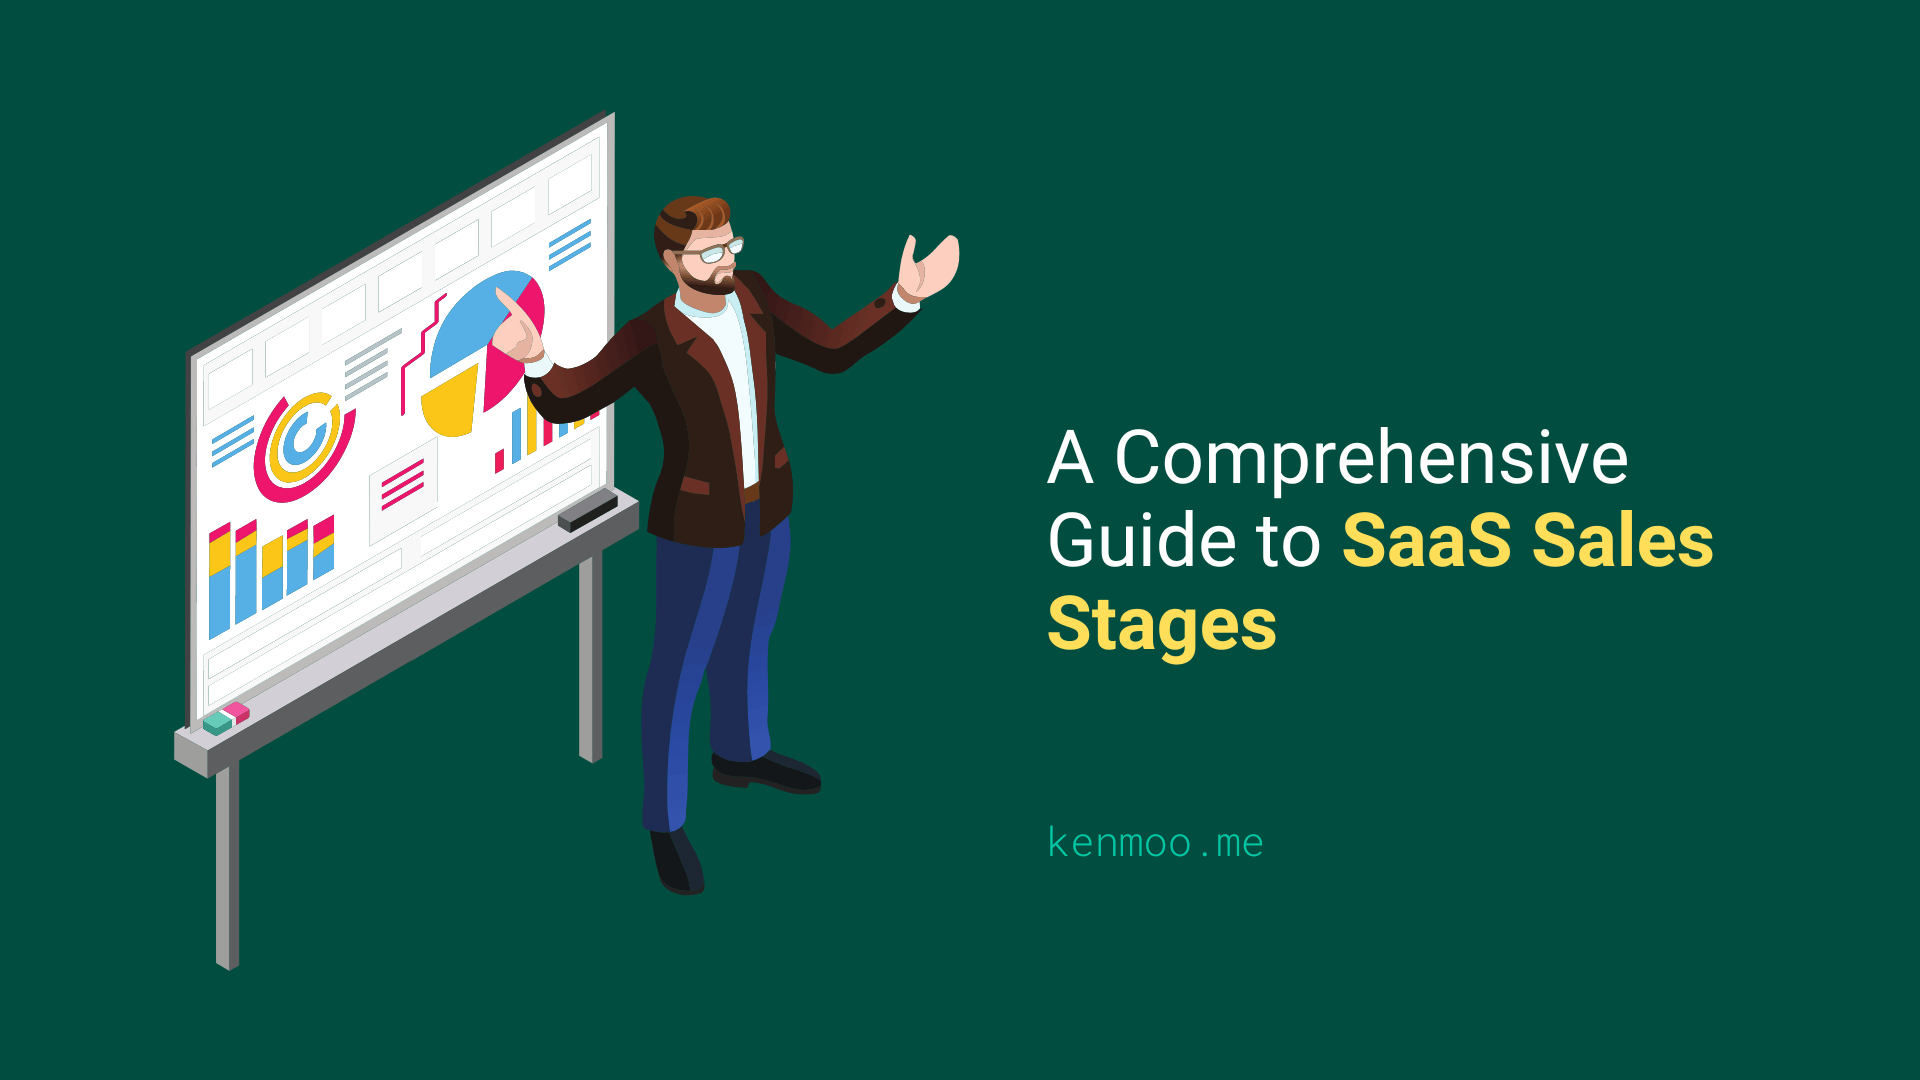 A Comprehensive Guide to SaaS Sales Stages